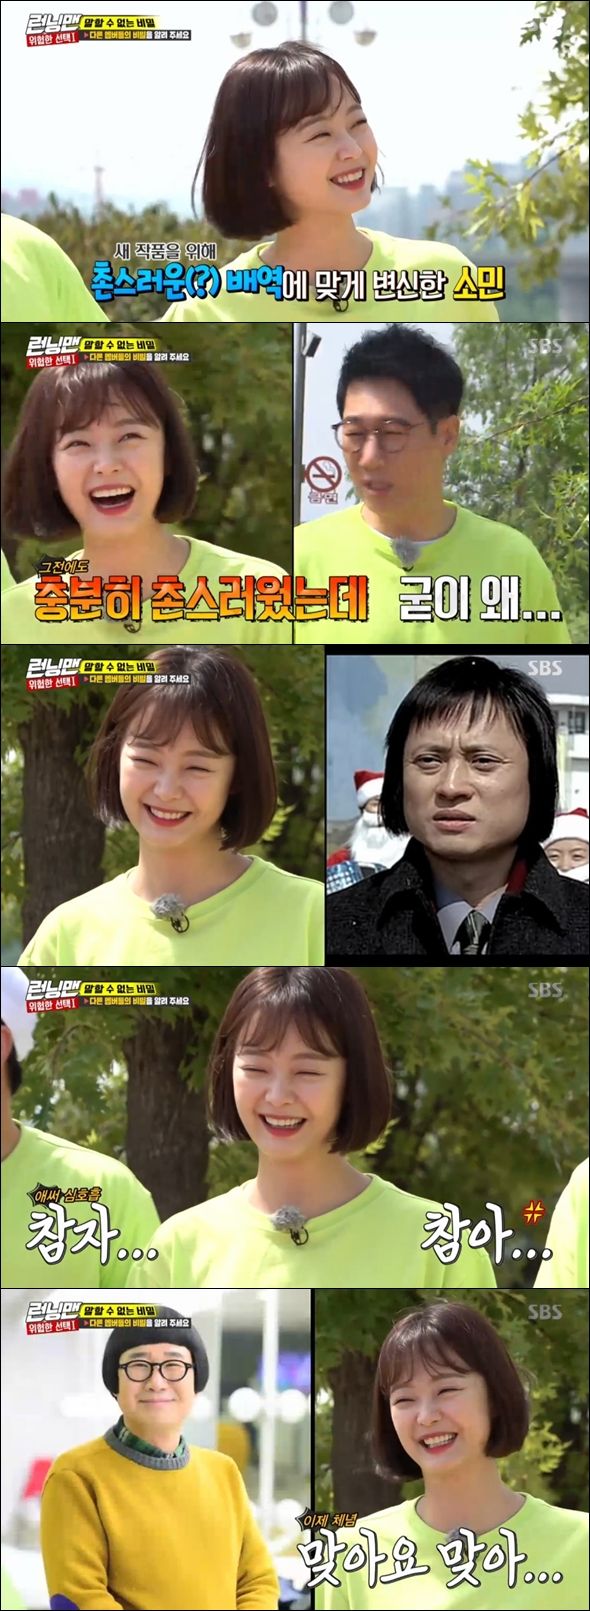 Running Man Jeon So-min was teased by the members when he changed his style to Bobbed hair.On SBS Running Man broadcast on the 2nd, the members paid attention to the changed horse hair style game of Jeon So-min from the opening.Jeon So-min cut his long hair and turned into a Bobbed hair because of his new acting role and appeared on the Running Man film.Usually, women praise her for changing her hairstyle and being polite, but Running Man was different. Ji Seok-jin said, Its rustic.Yang said that Jeon So-min resembled Kim Byeong-ok, the actor of the film Kindly Kim Ja-ja. Haha laughed when he said he resembled comedian Choi Yang-Rak.On the other hand, Running Man was featured on the same day with the members Truth or Challenge Race, Big Bangs Victory, Actors Ieliya, Lee Ju-yeon, singer Stern, Icons Bobby and Bia, and Gag Woman Kim Ji-min.